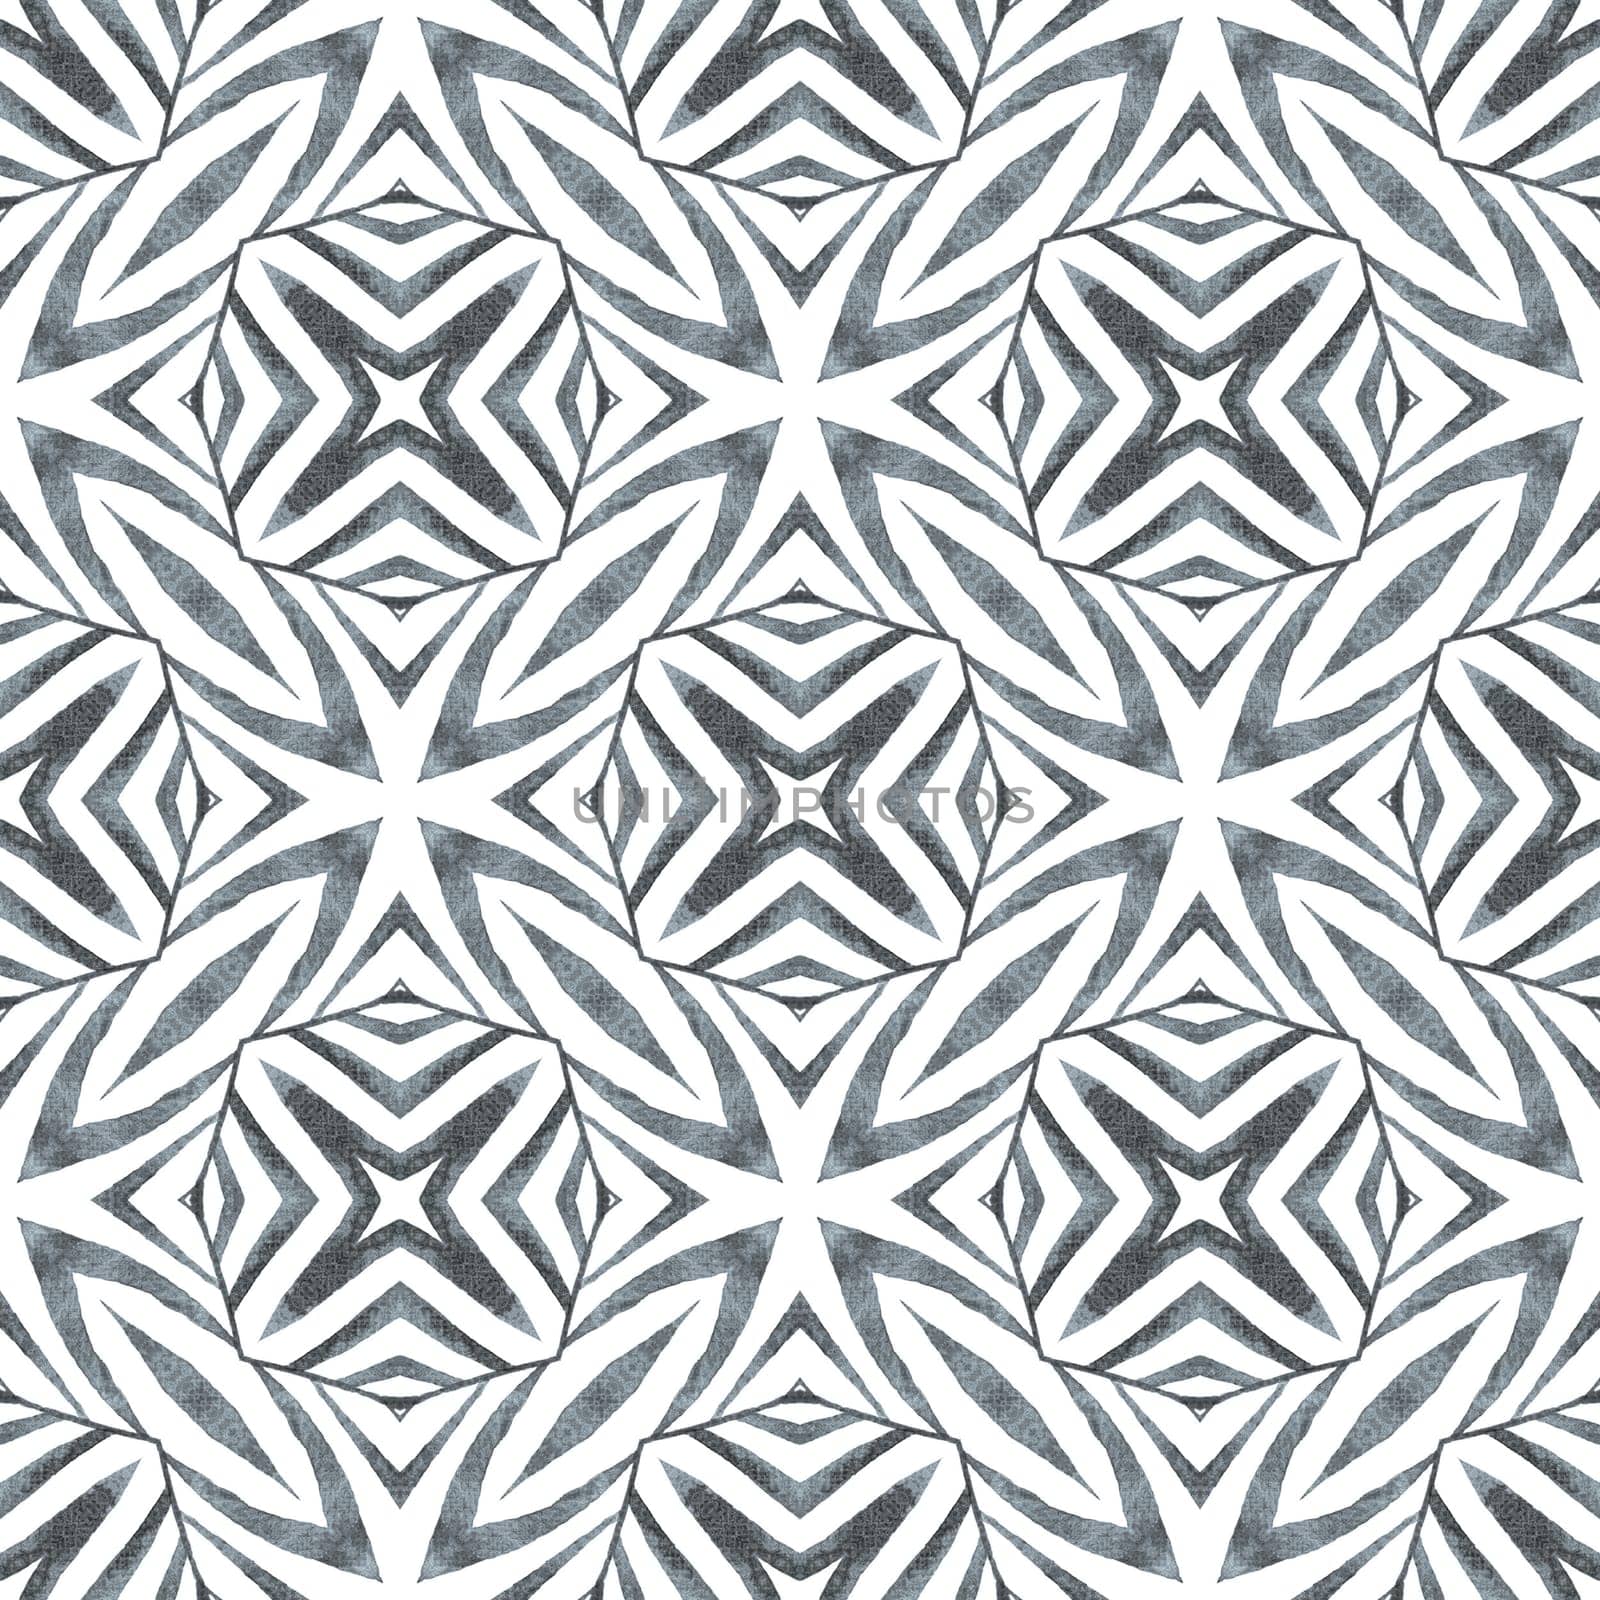 Textile ready memorable print, swimwear fabric, wallpaper, wrapping. Black and white worthy boho chic summer design. Tiled watercolor background. Hand painted tiled watercolor border.